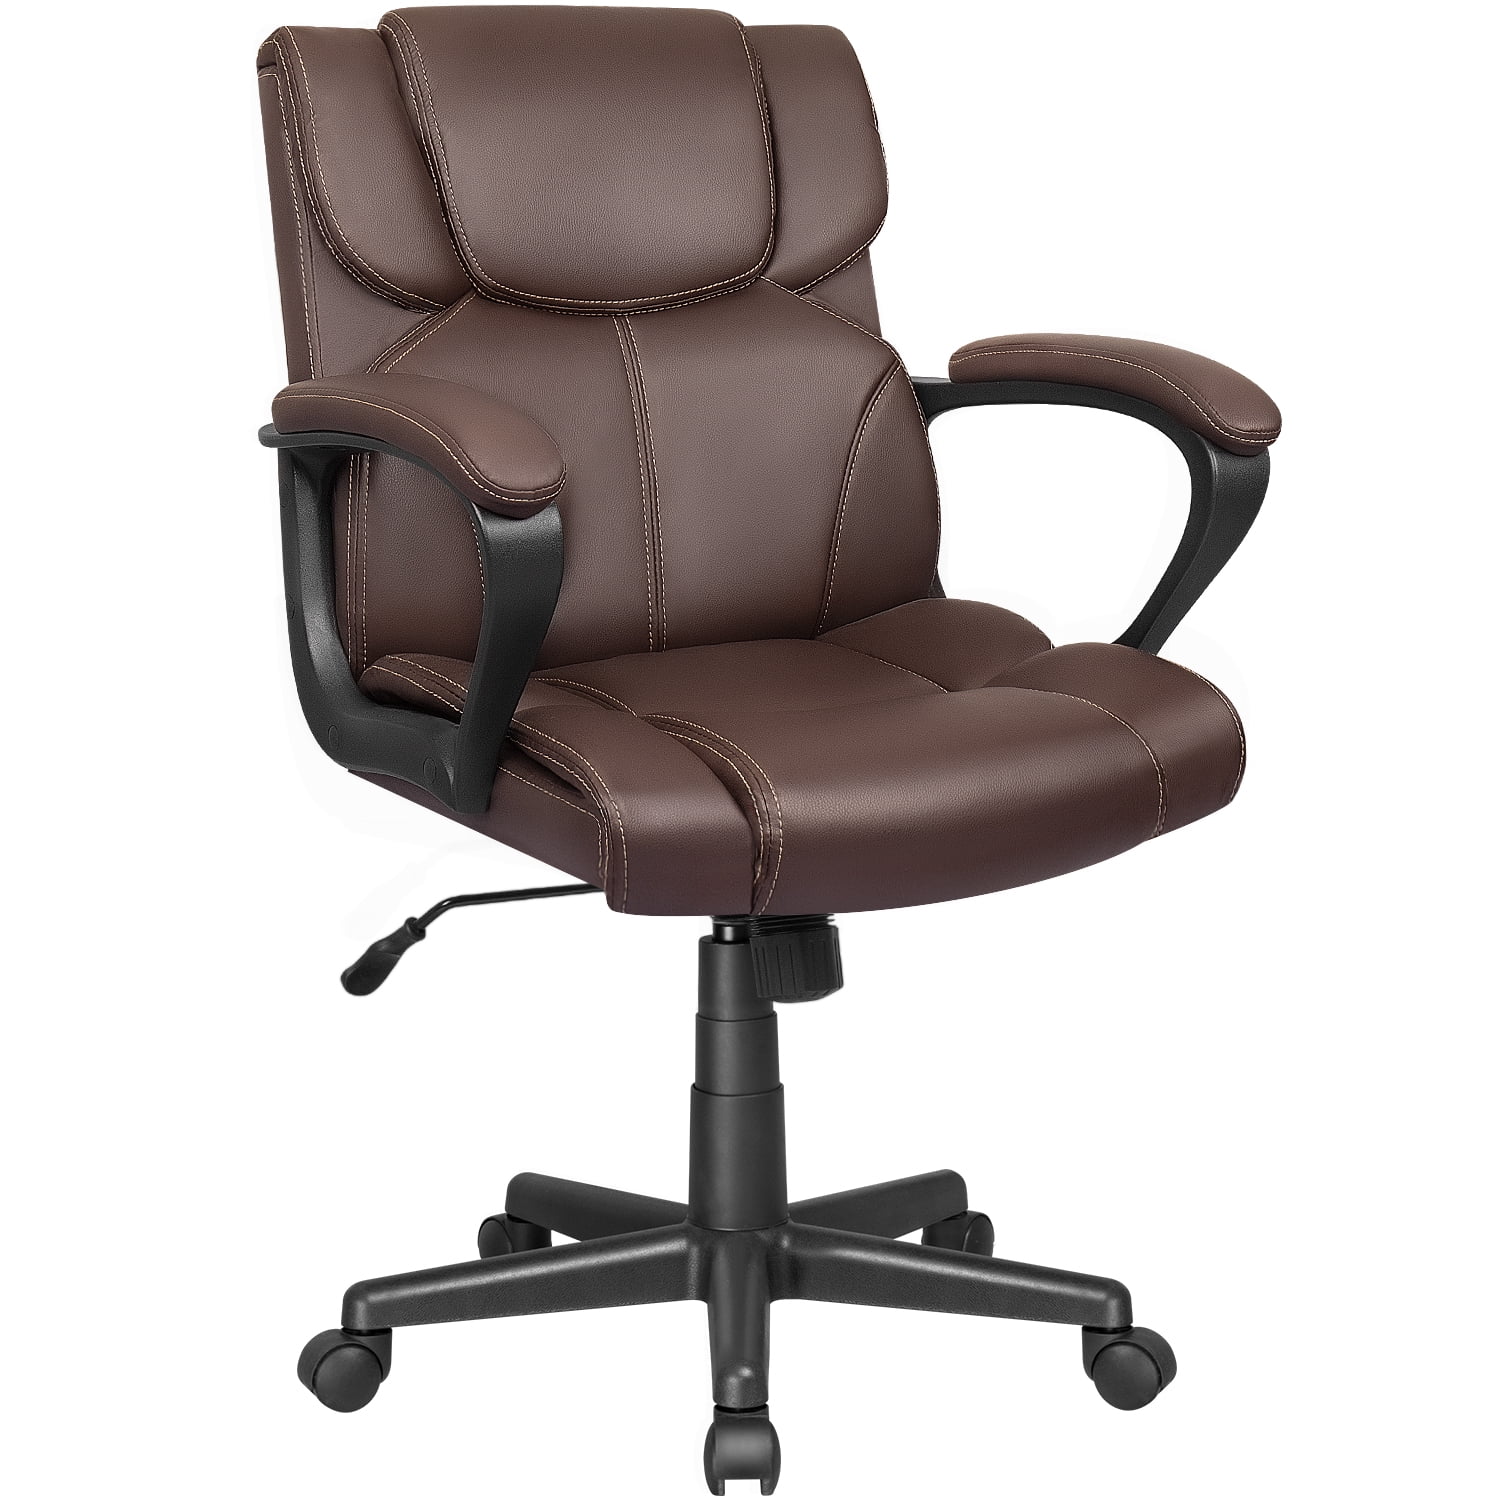 Homall Mid Back Executive Office Chair Swivel Computer Task Chair with ...